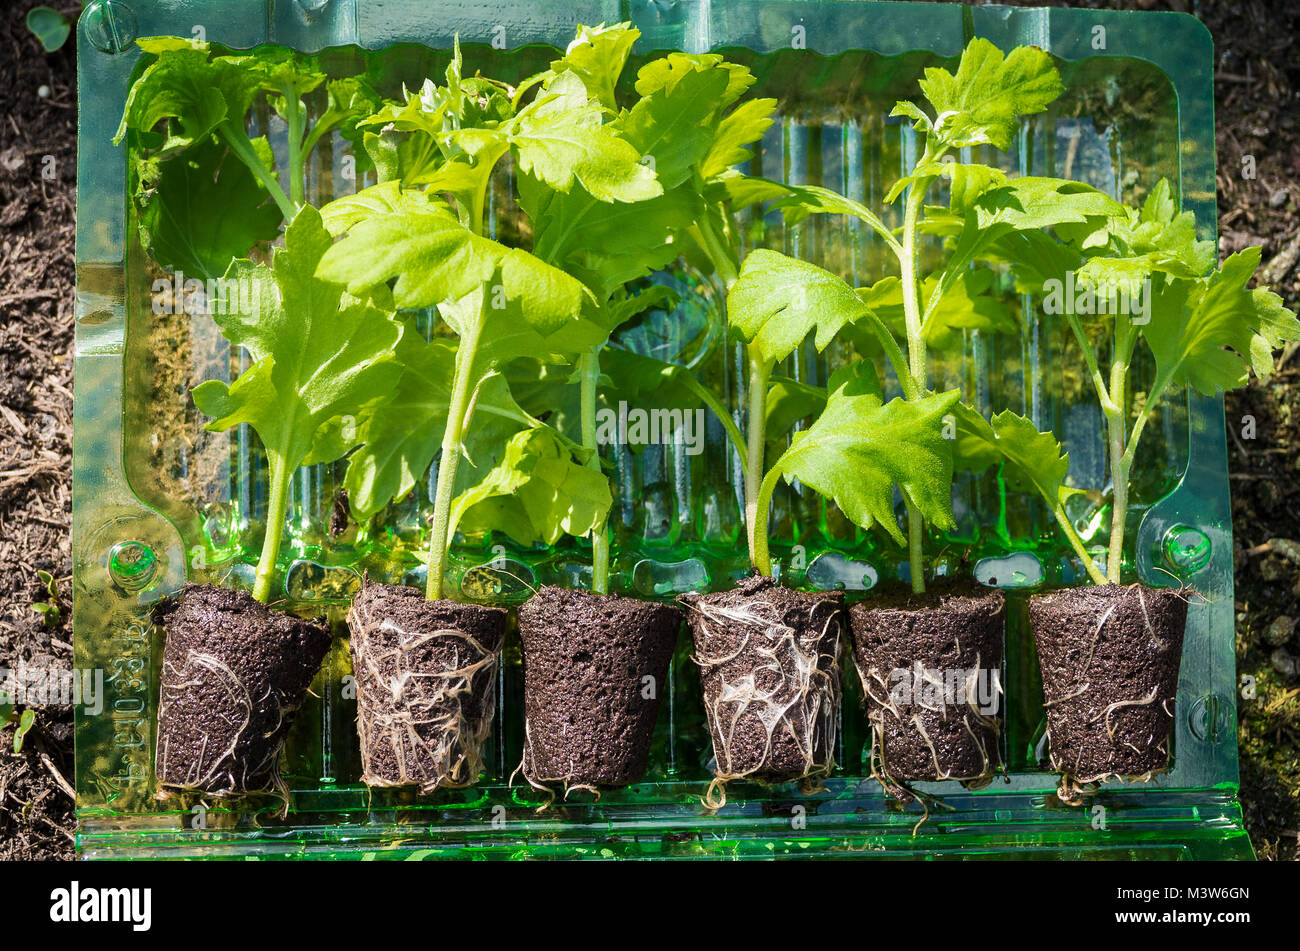 Young rooted chrysanthemum plug plants opened in their mailing package Stock Photo